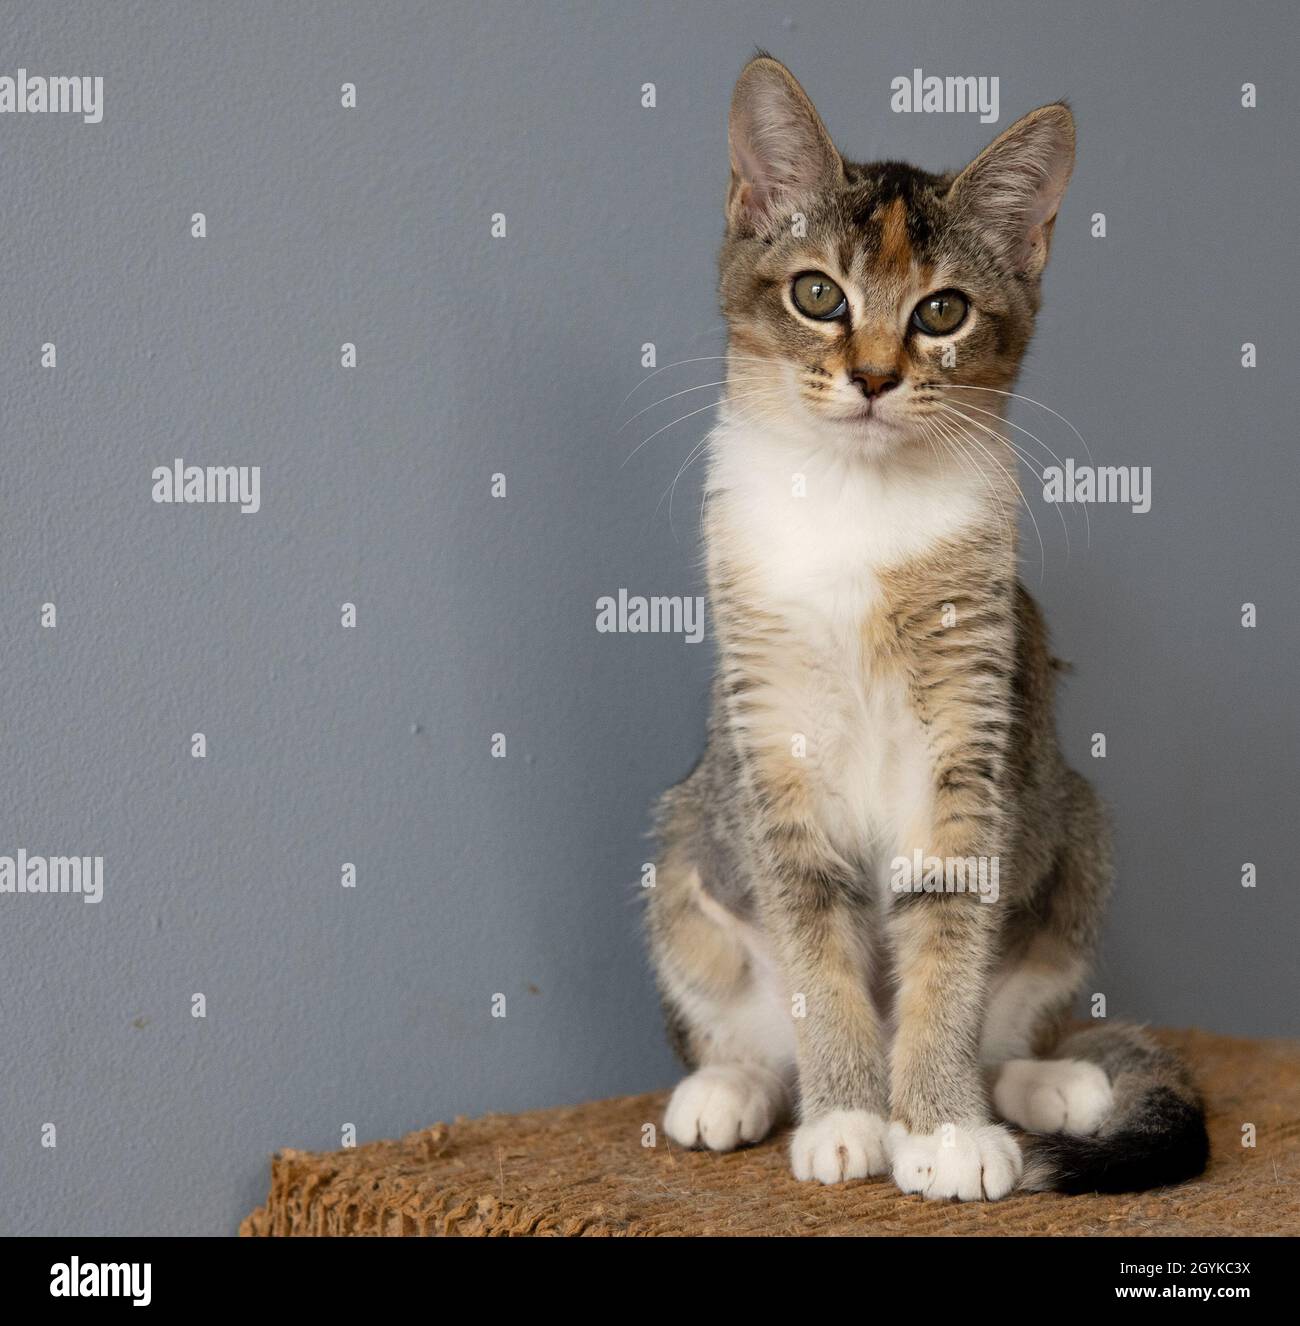 A calico kitten poses, sitting upright on a cardboard scratcher Stock Photo